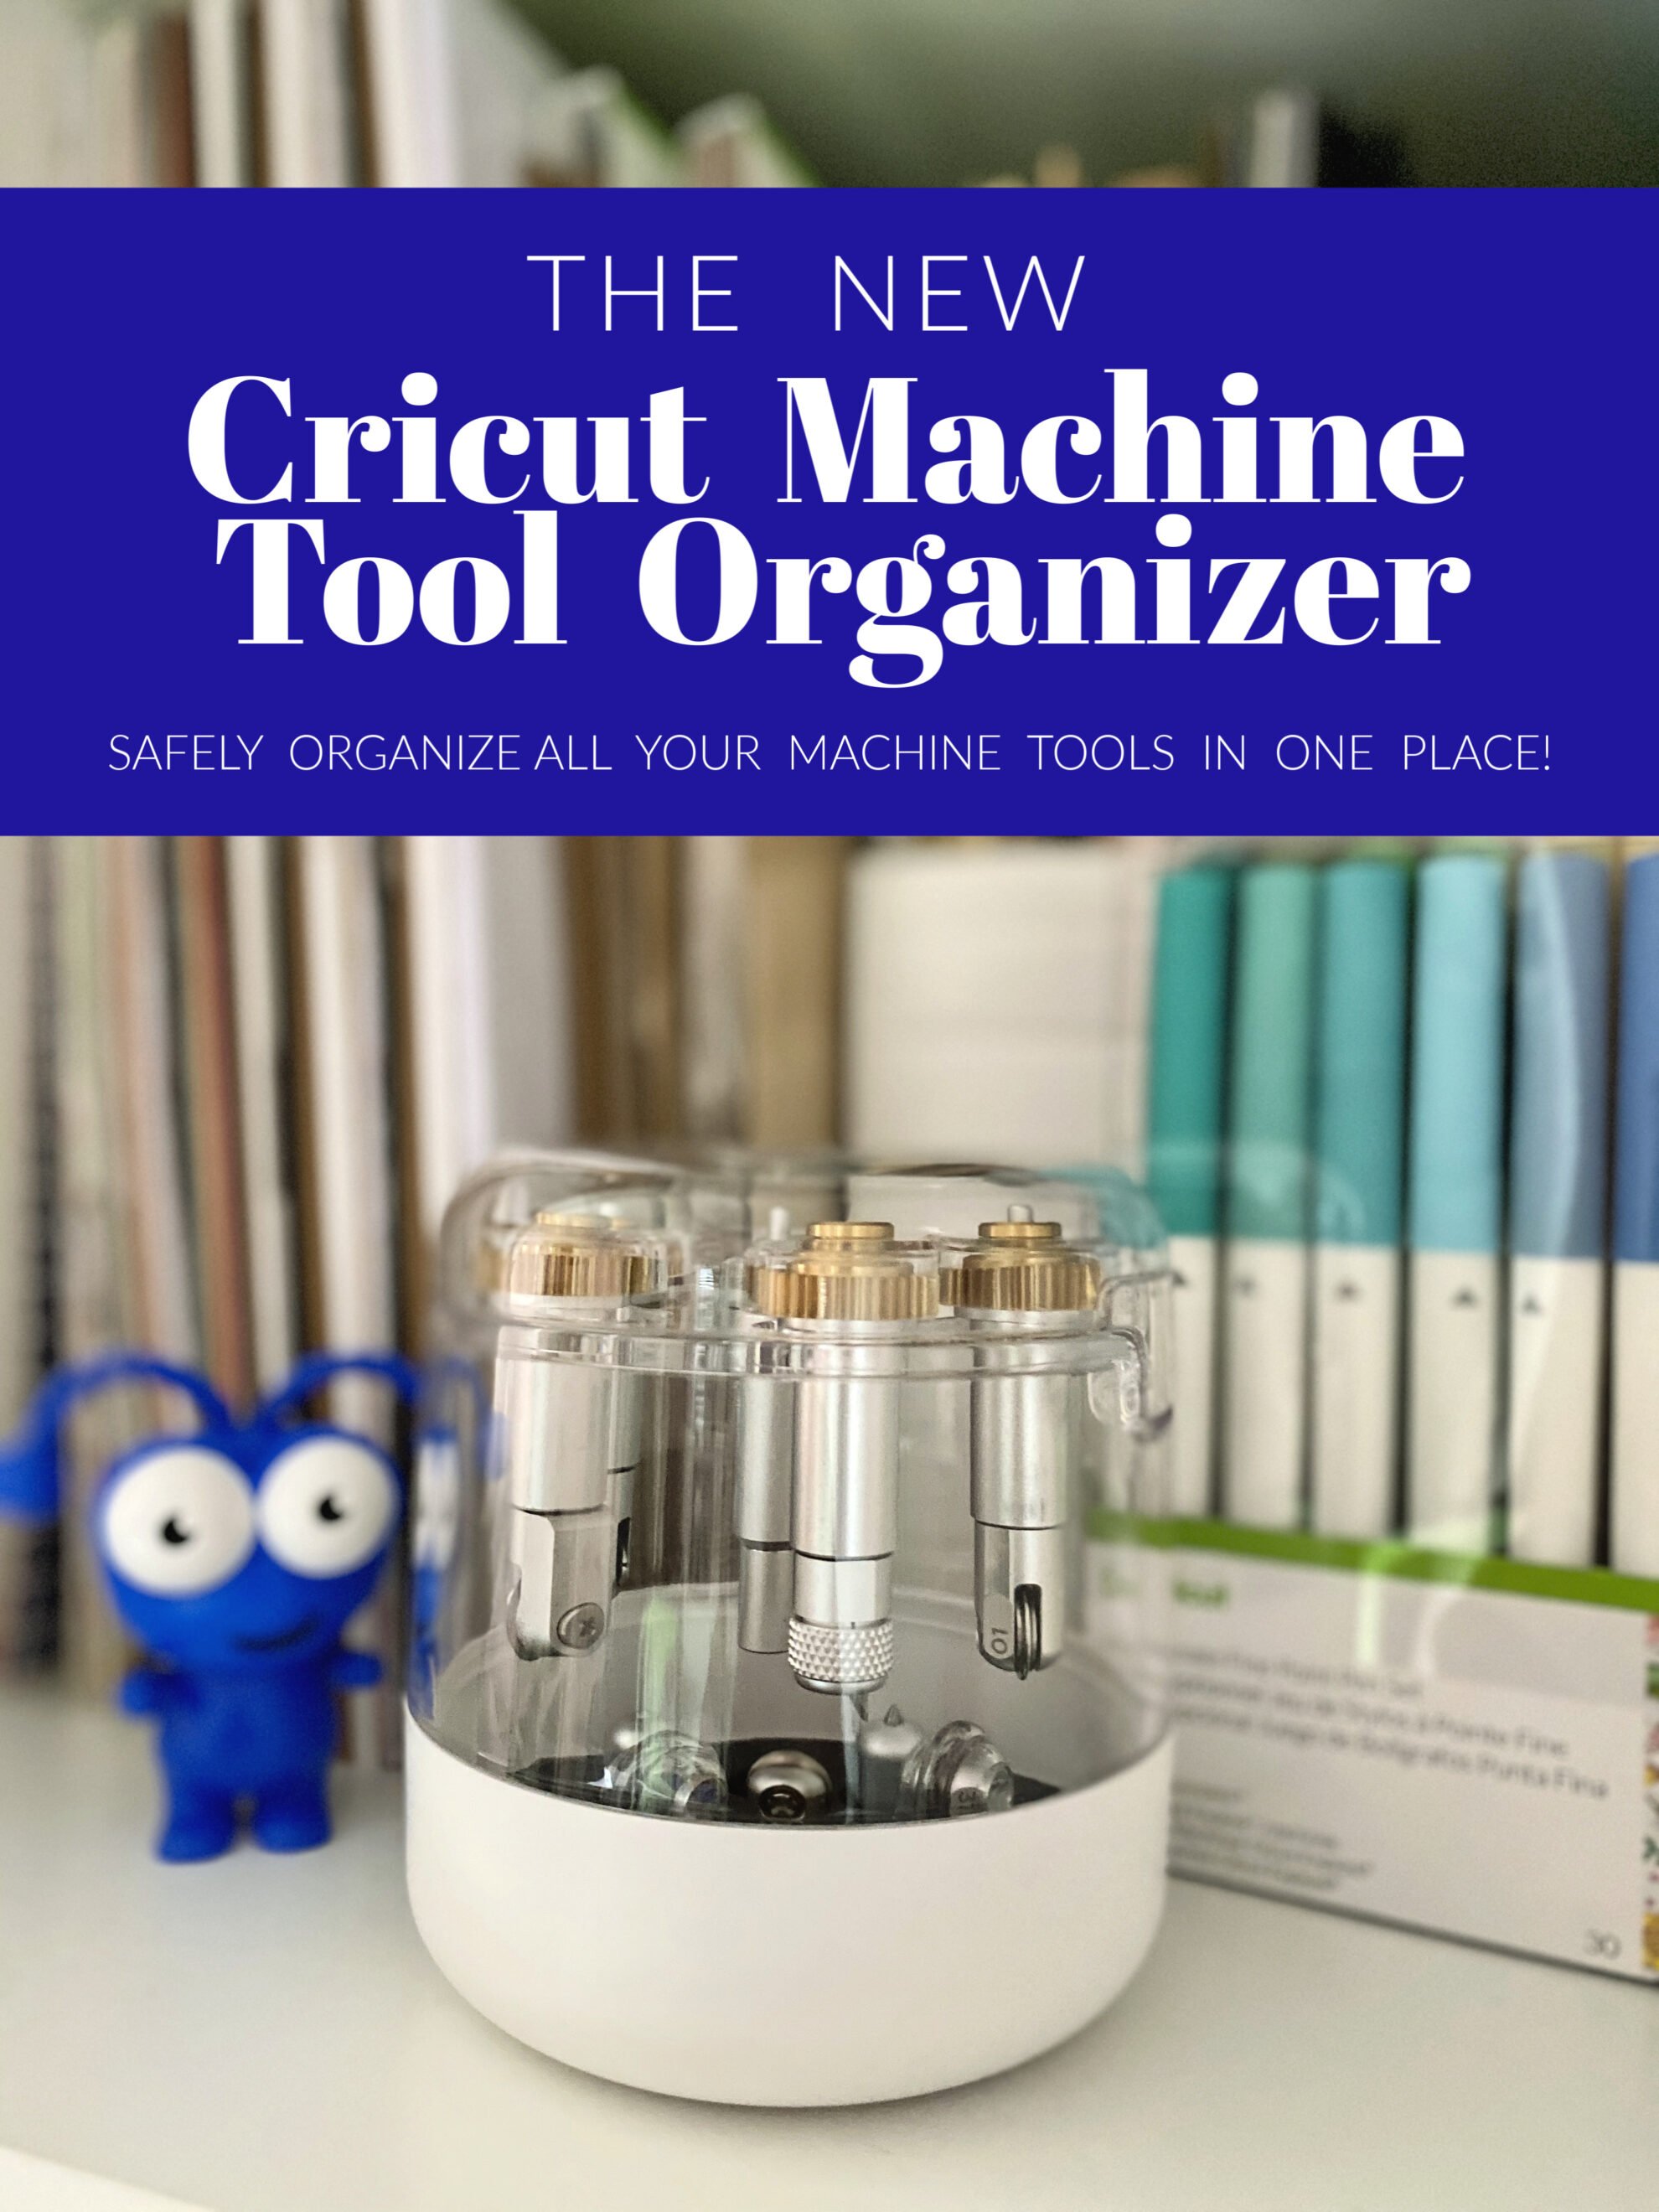 WHAT TOOLS DO I NEED FOR MY CRICUT MACHINE?